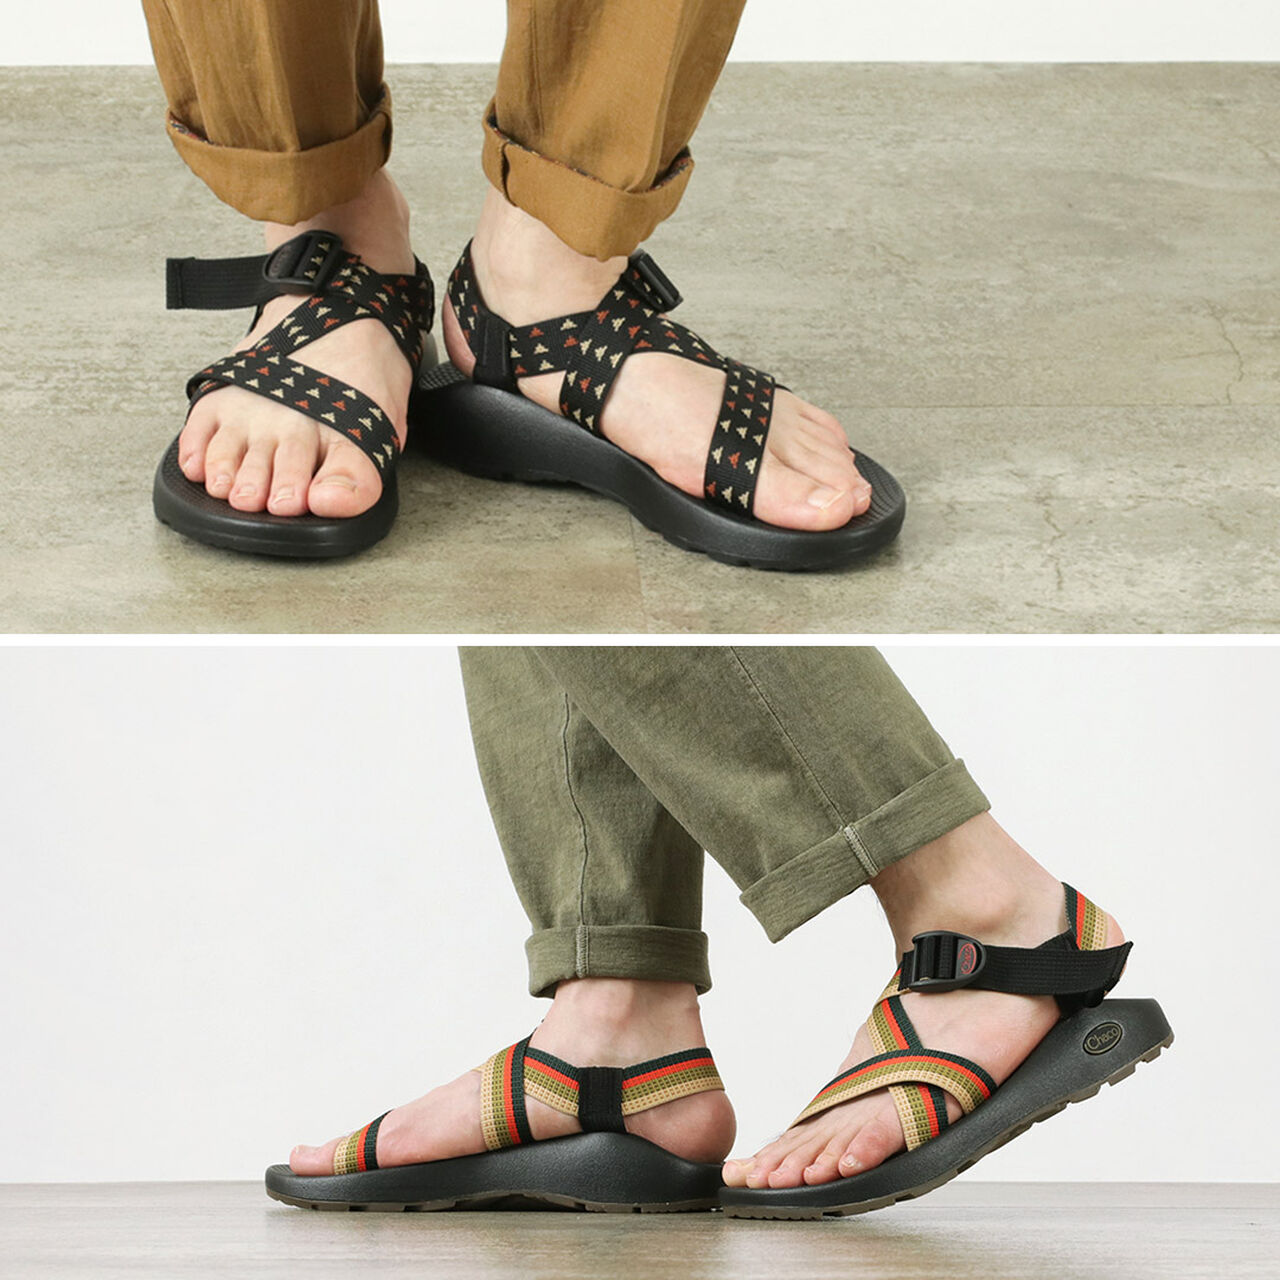 How to wear socks with sandals: Birkenstock, Teva, Chaco, and more